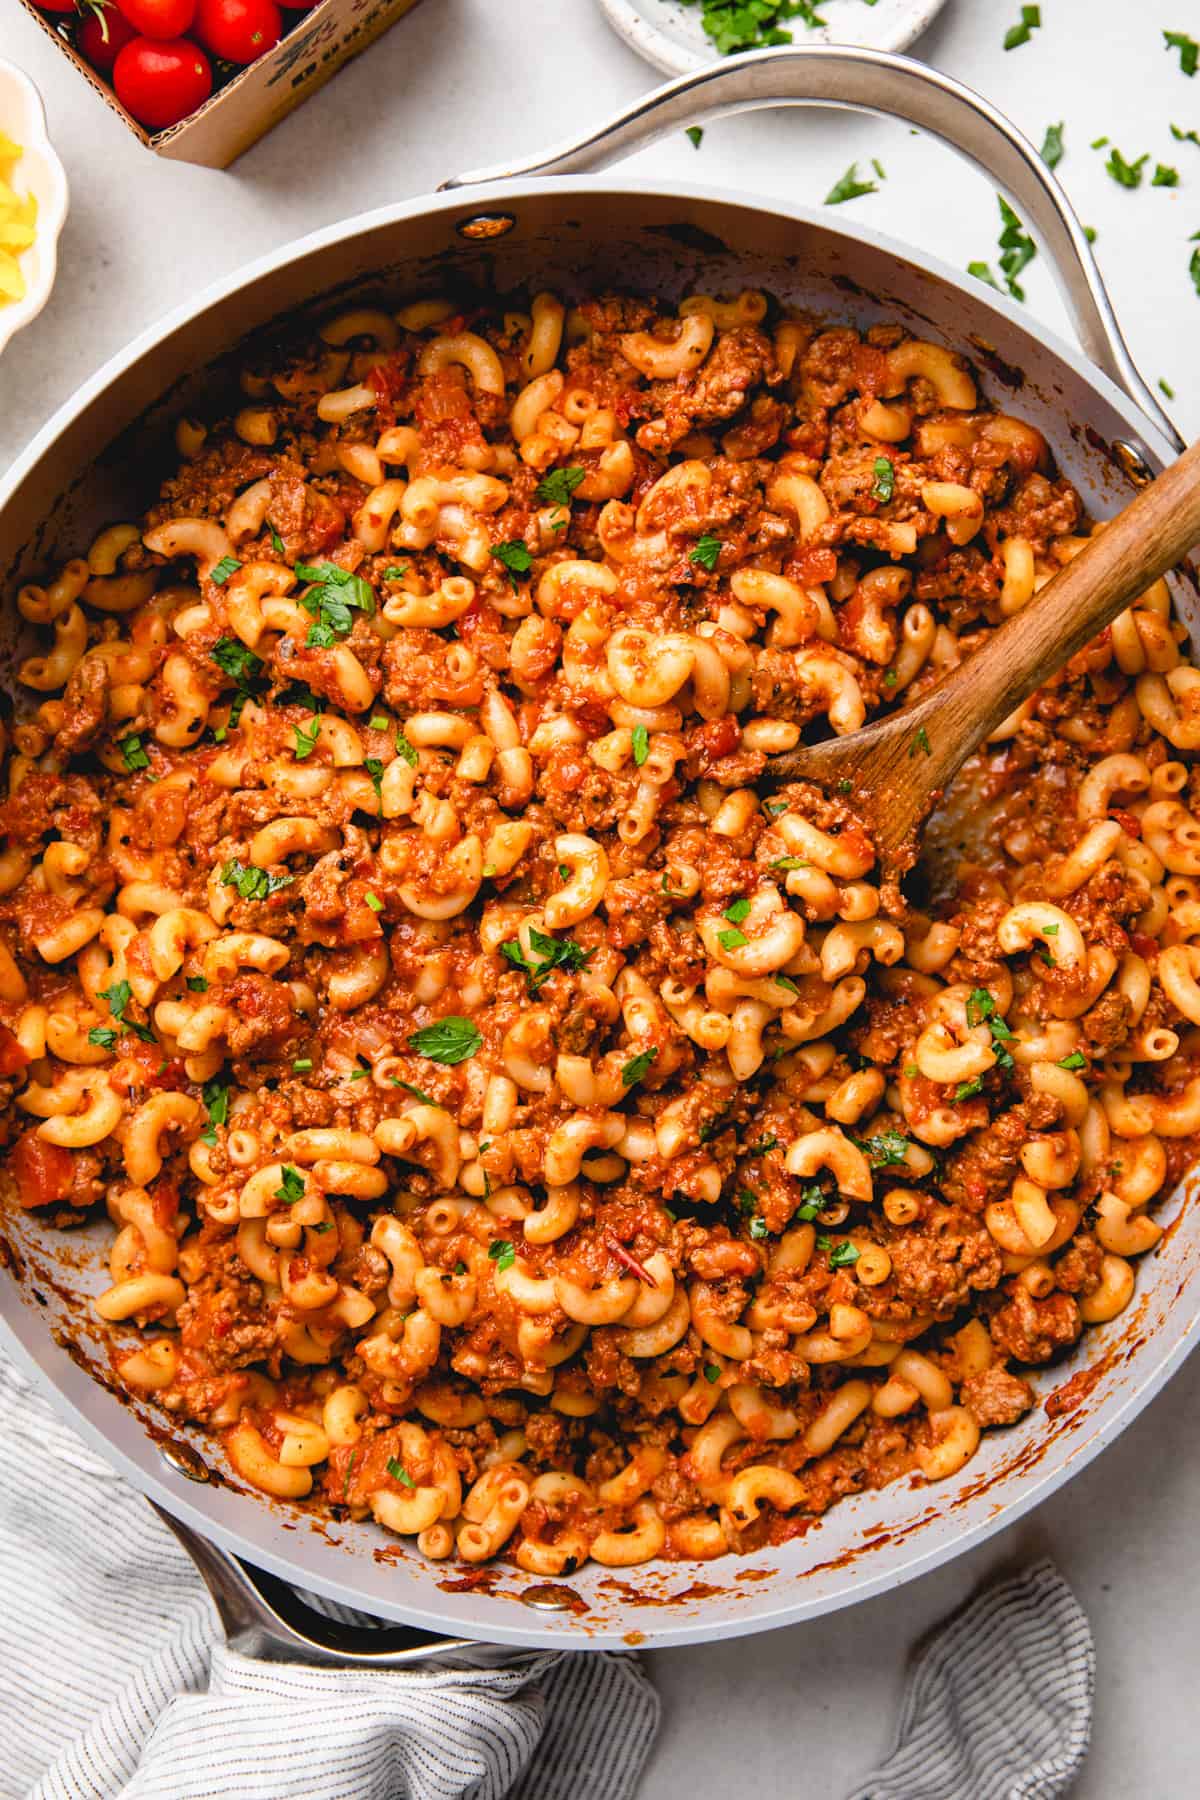 Old Fasioned American Goulash, made with round beef, tomato sauce, and elbow macaroni, topped with chopped parsley.